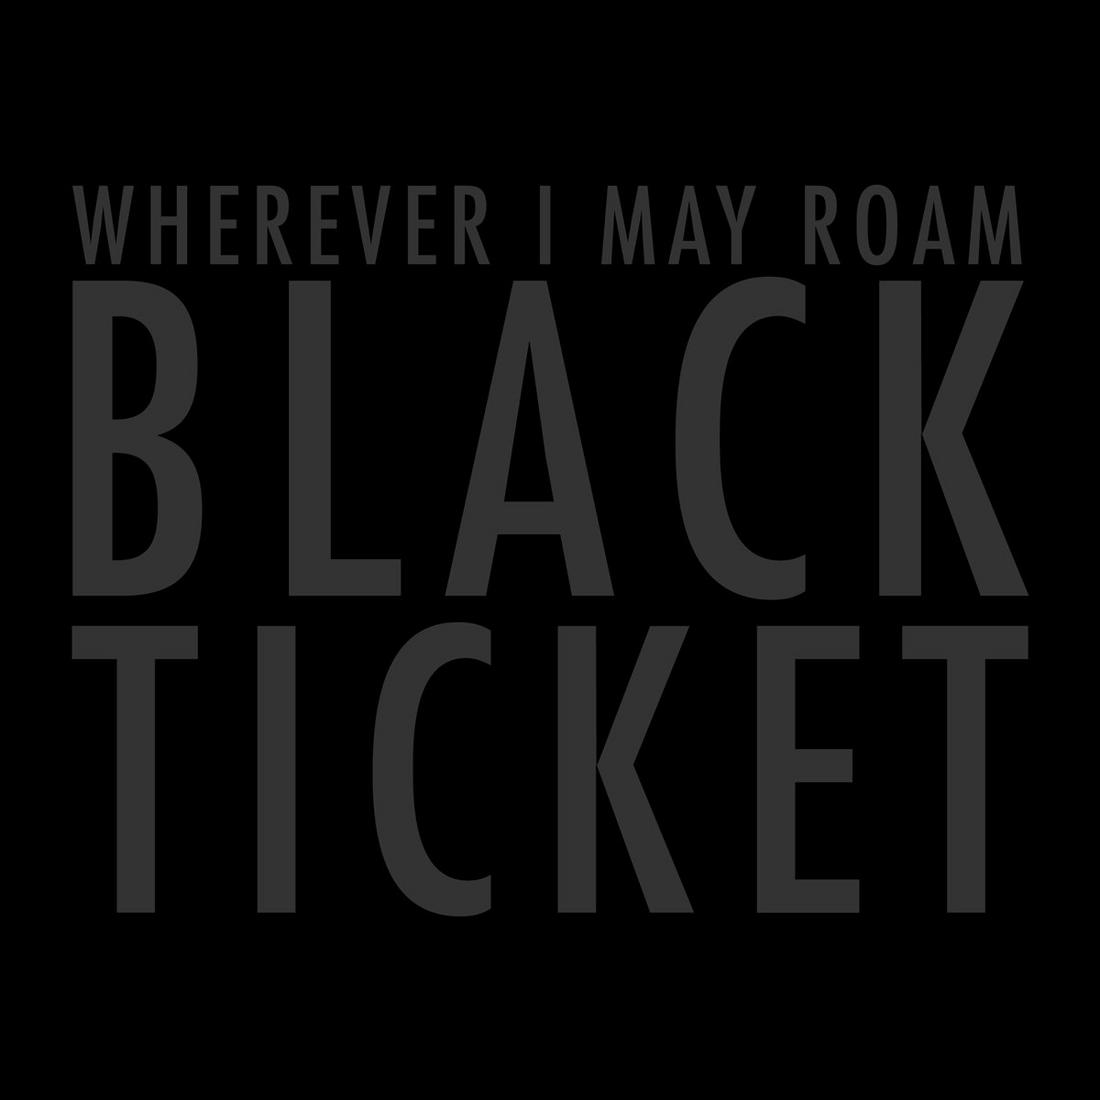 How to Purchase a Wherever I May Roam Black Ticket